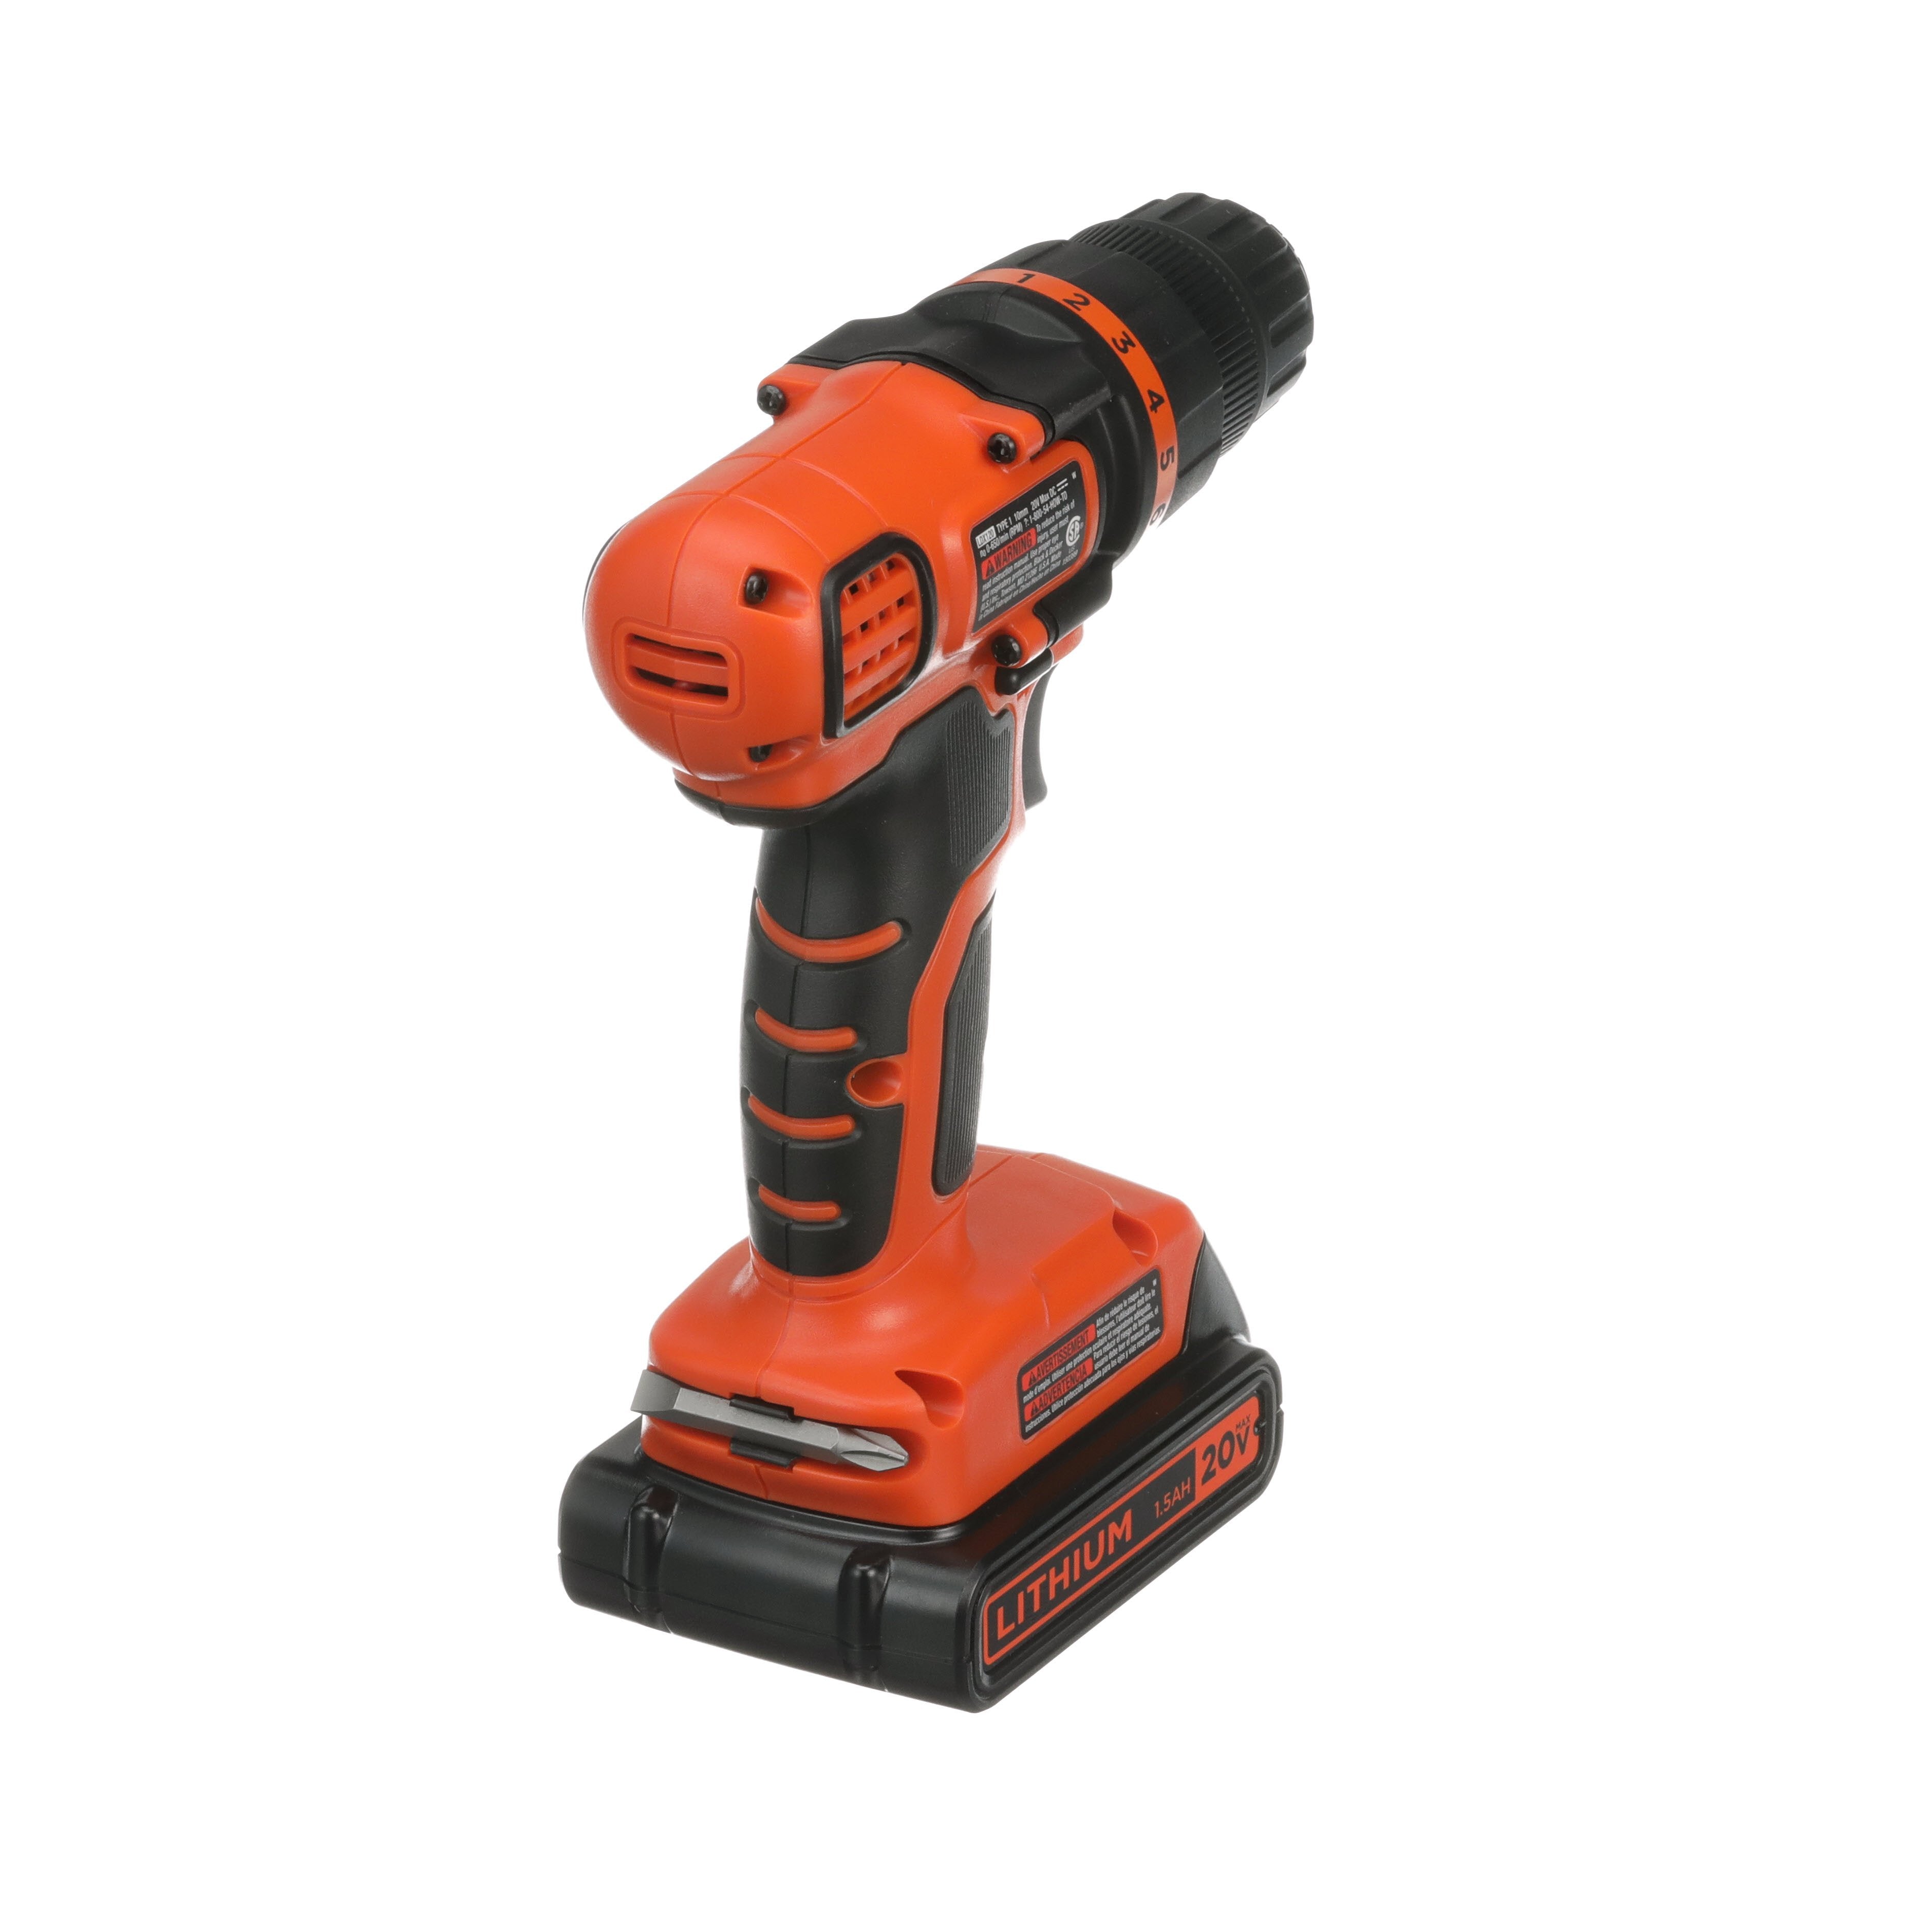 Black & Decker 20V Max LDX120 Lithium 3/8 DRILL/DRIVER With Battery No  Charger